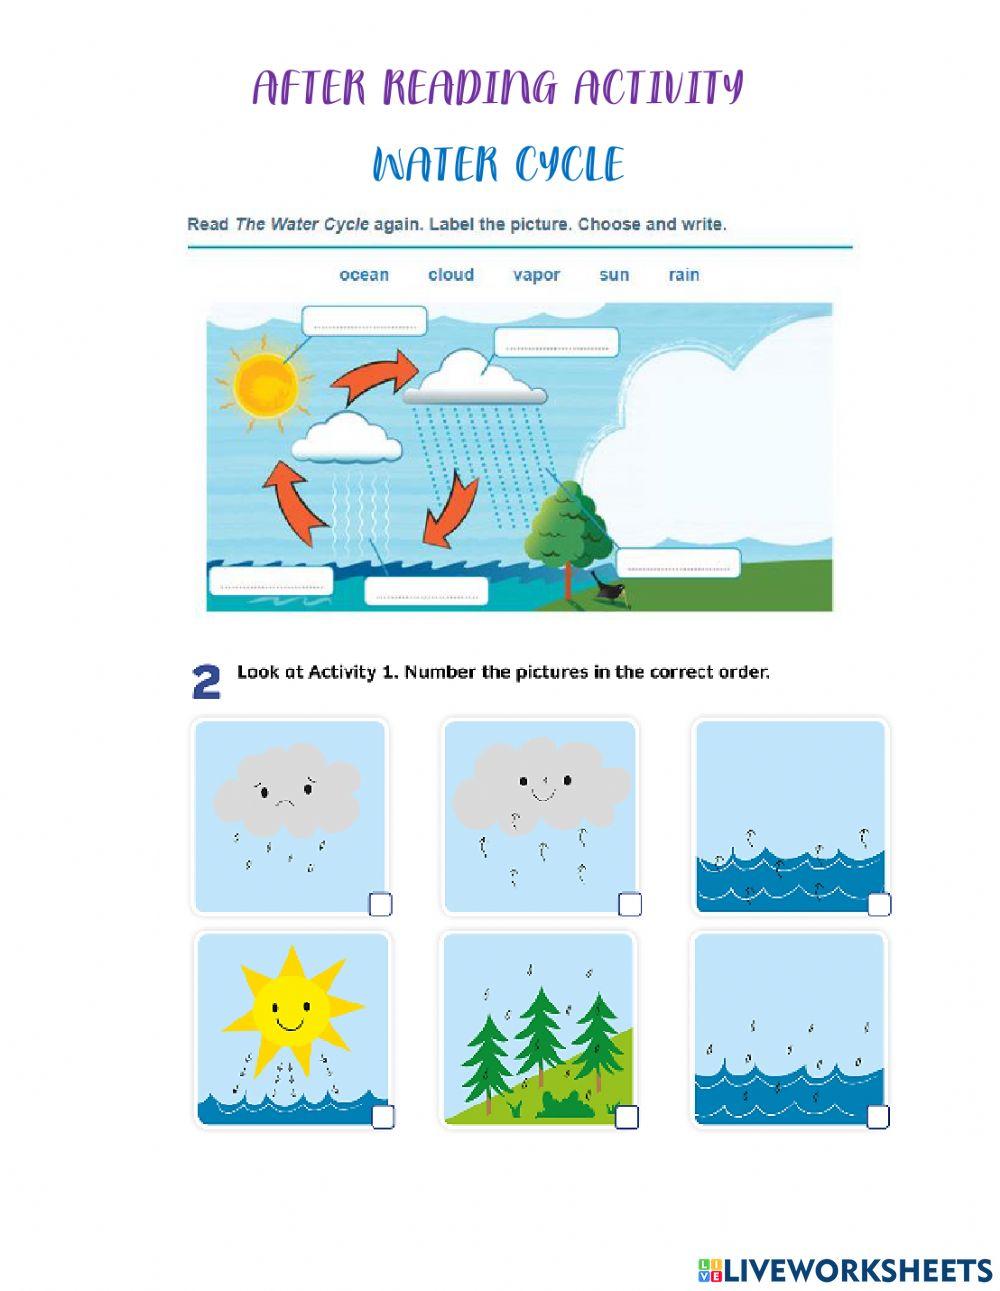 Water cycle elements